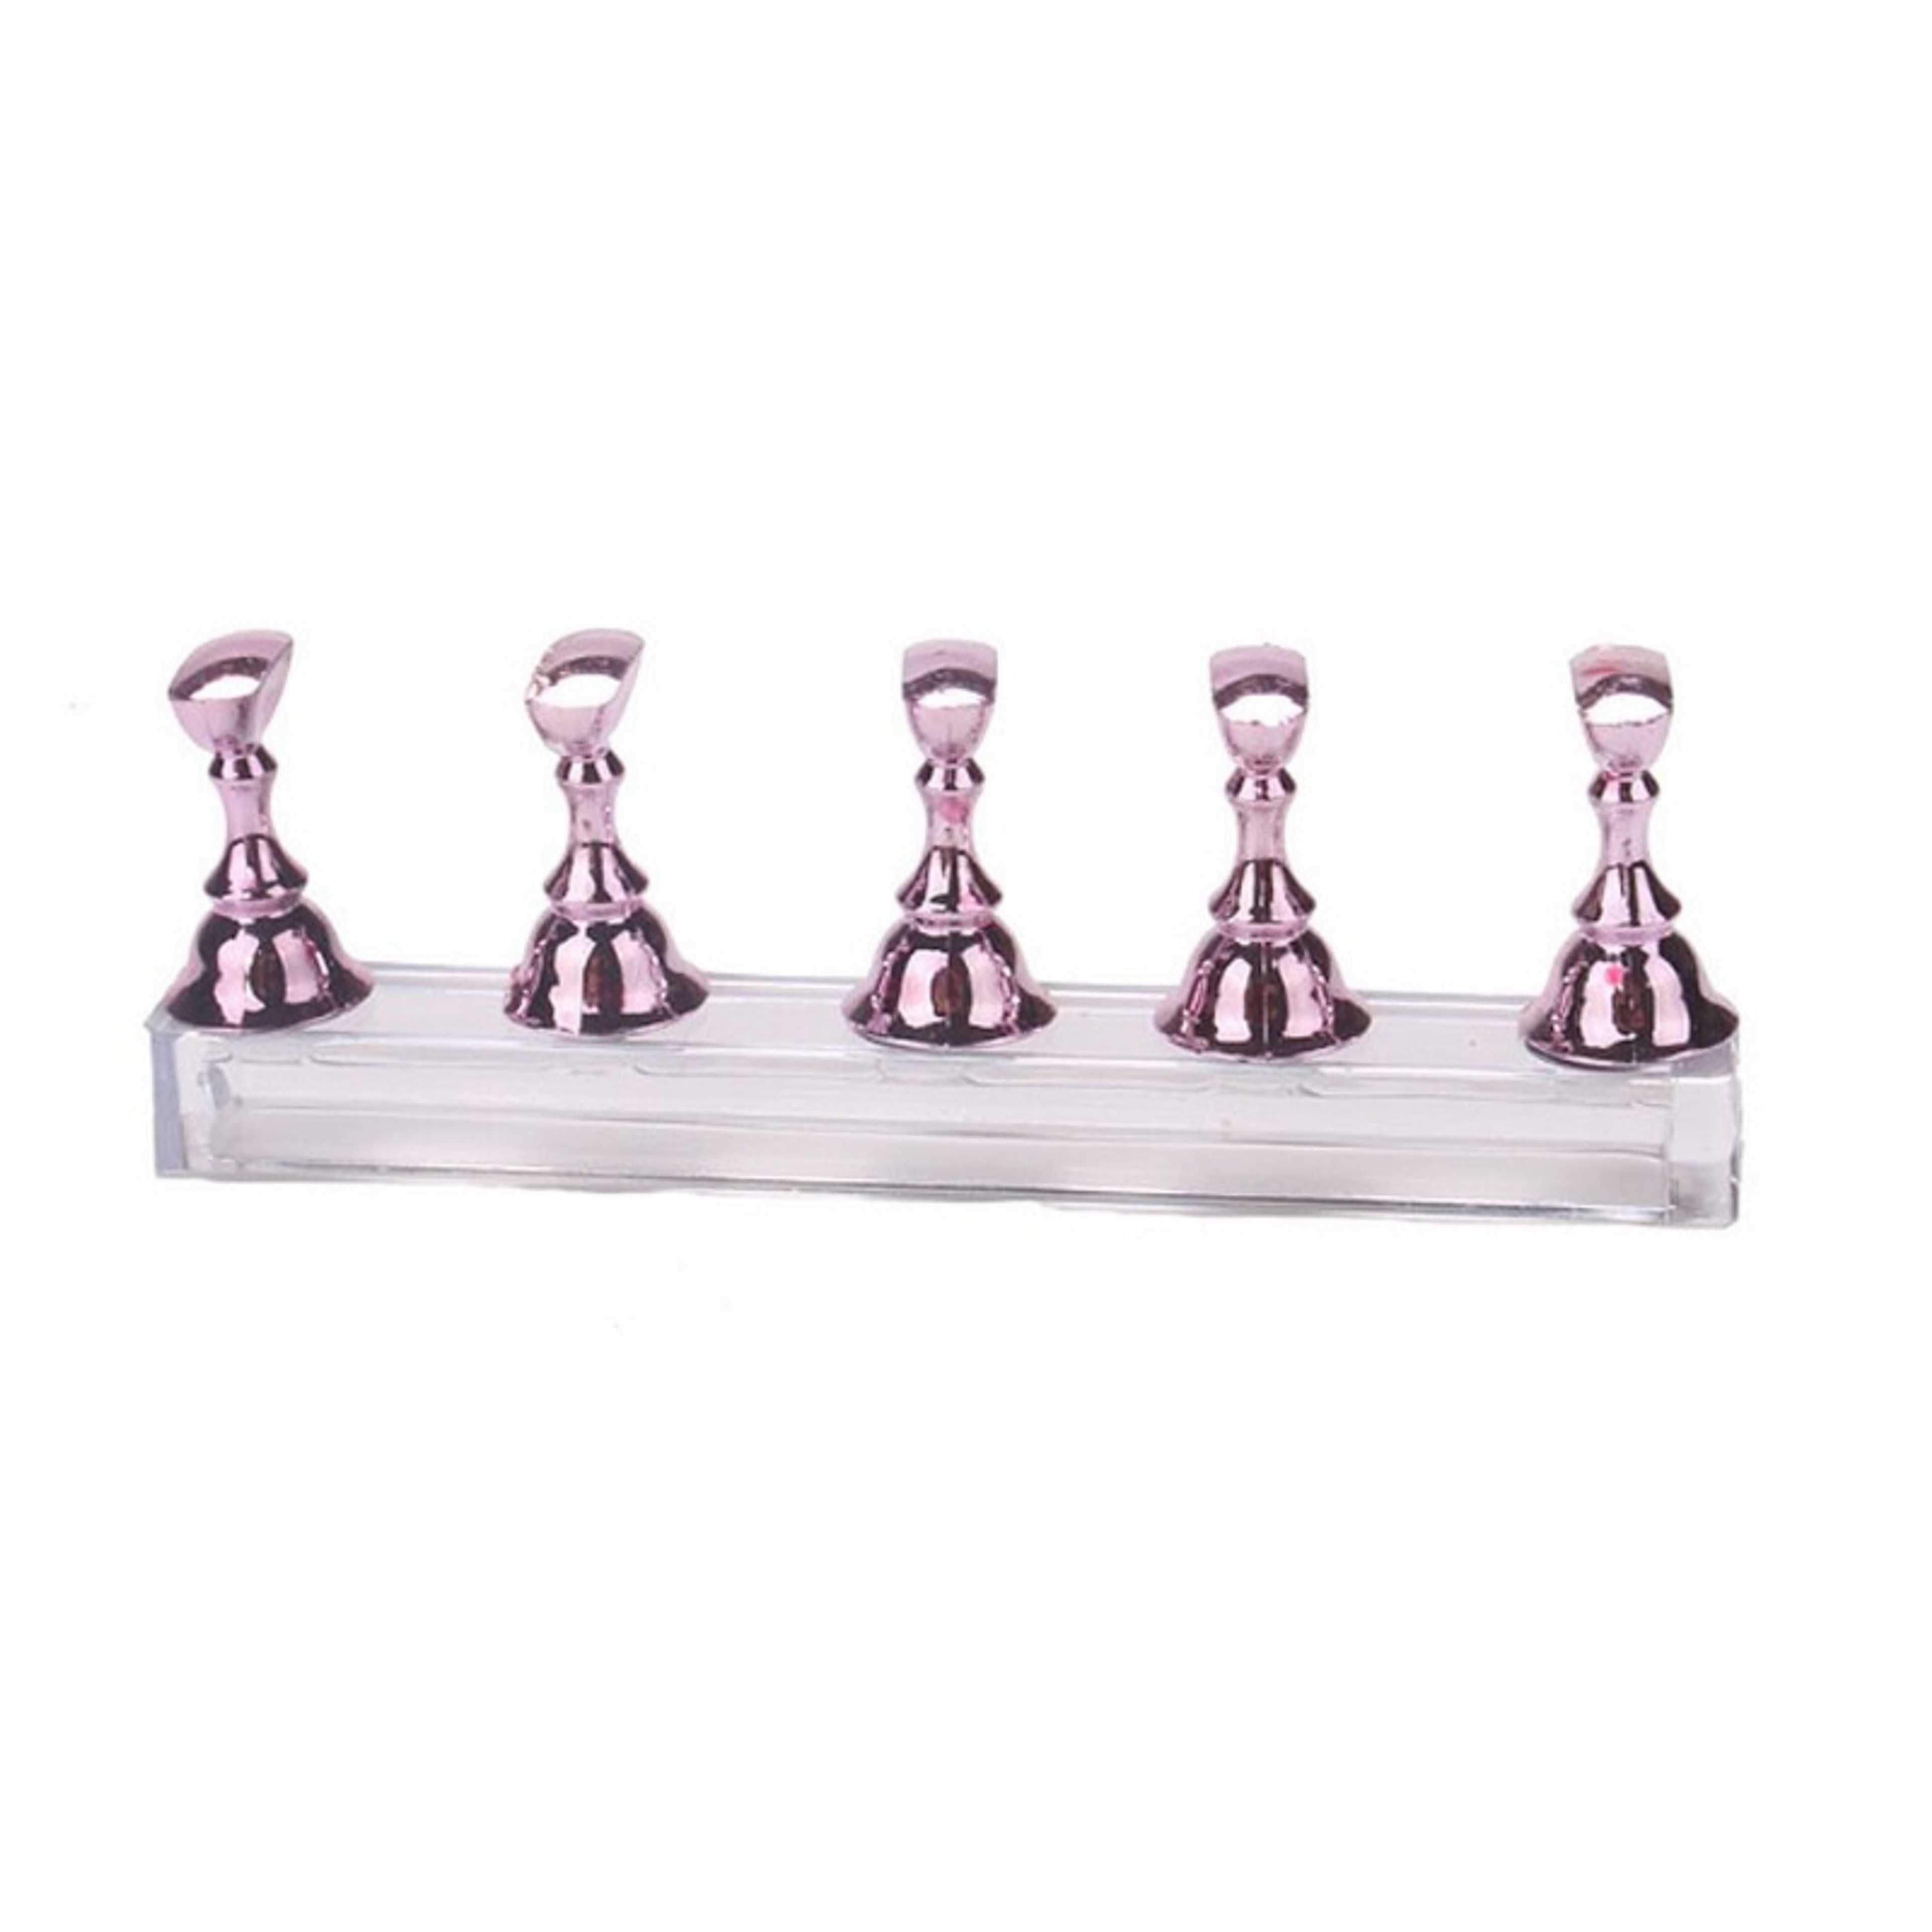 5 Pieces Chess Board Magnetic Nail Art Practice Display Stand